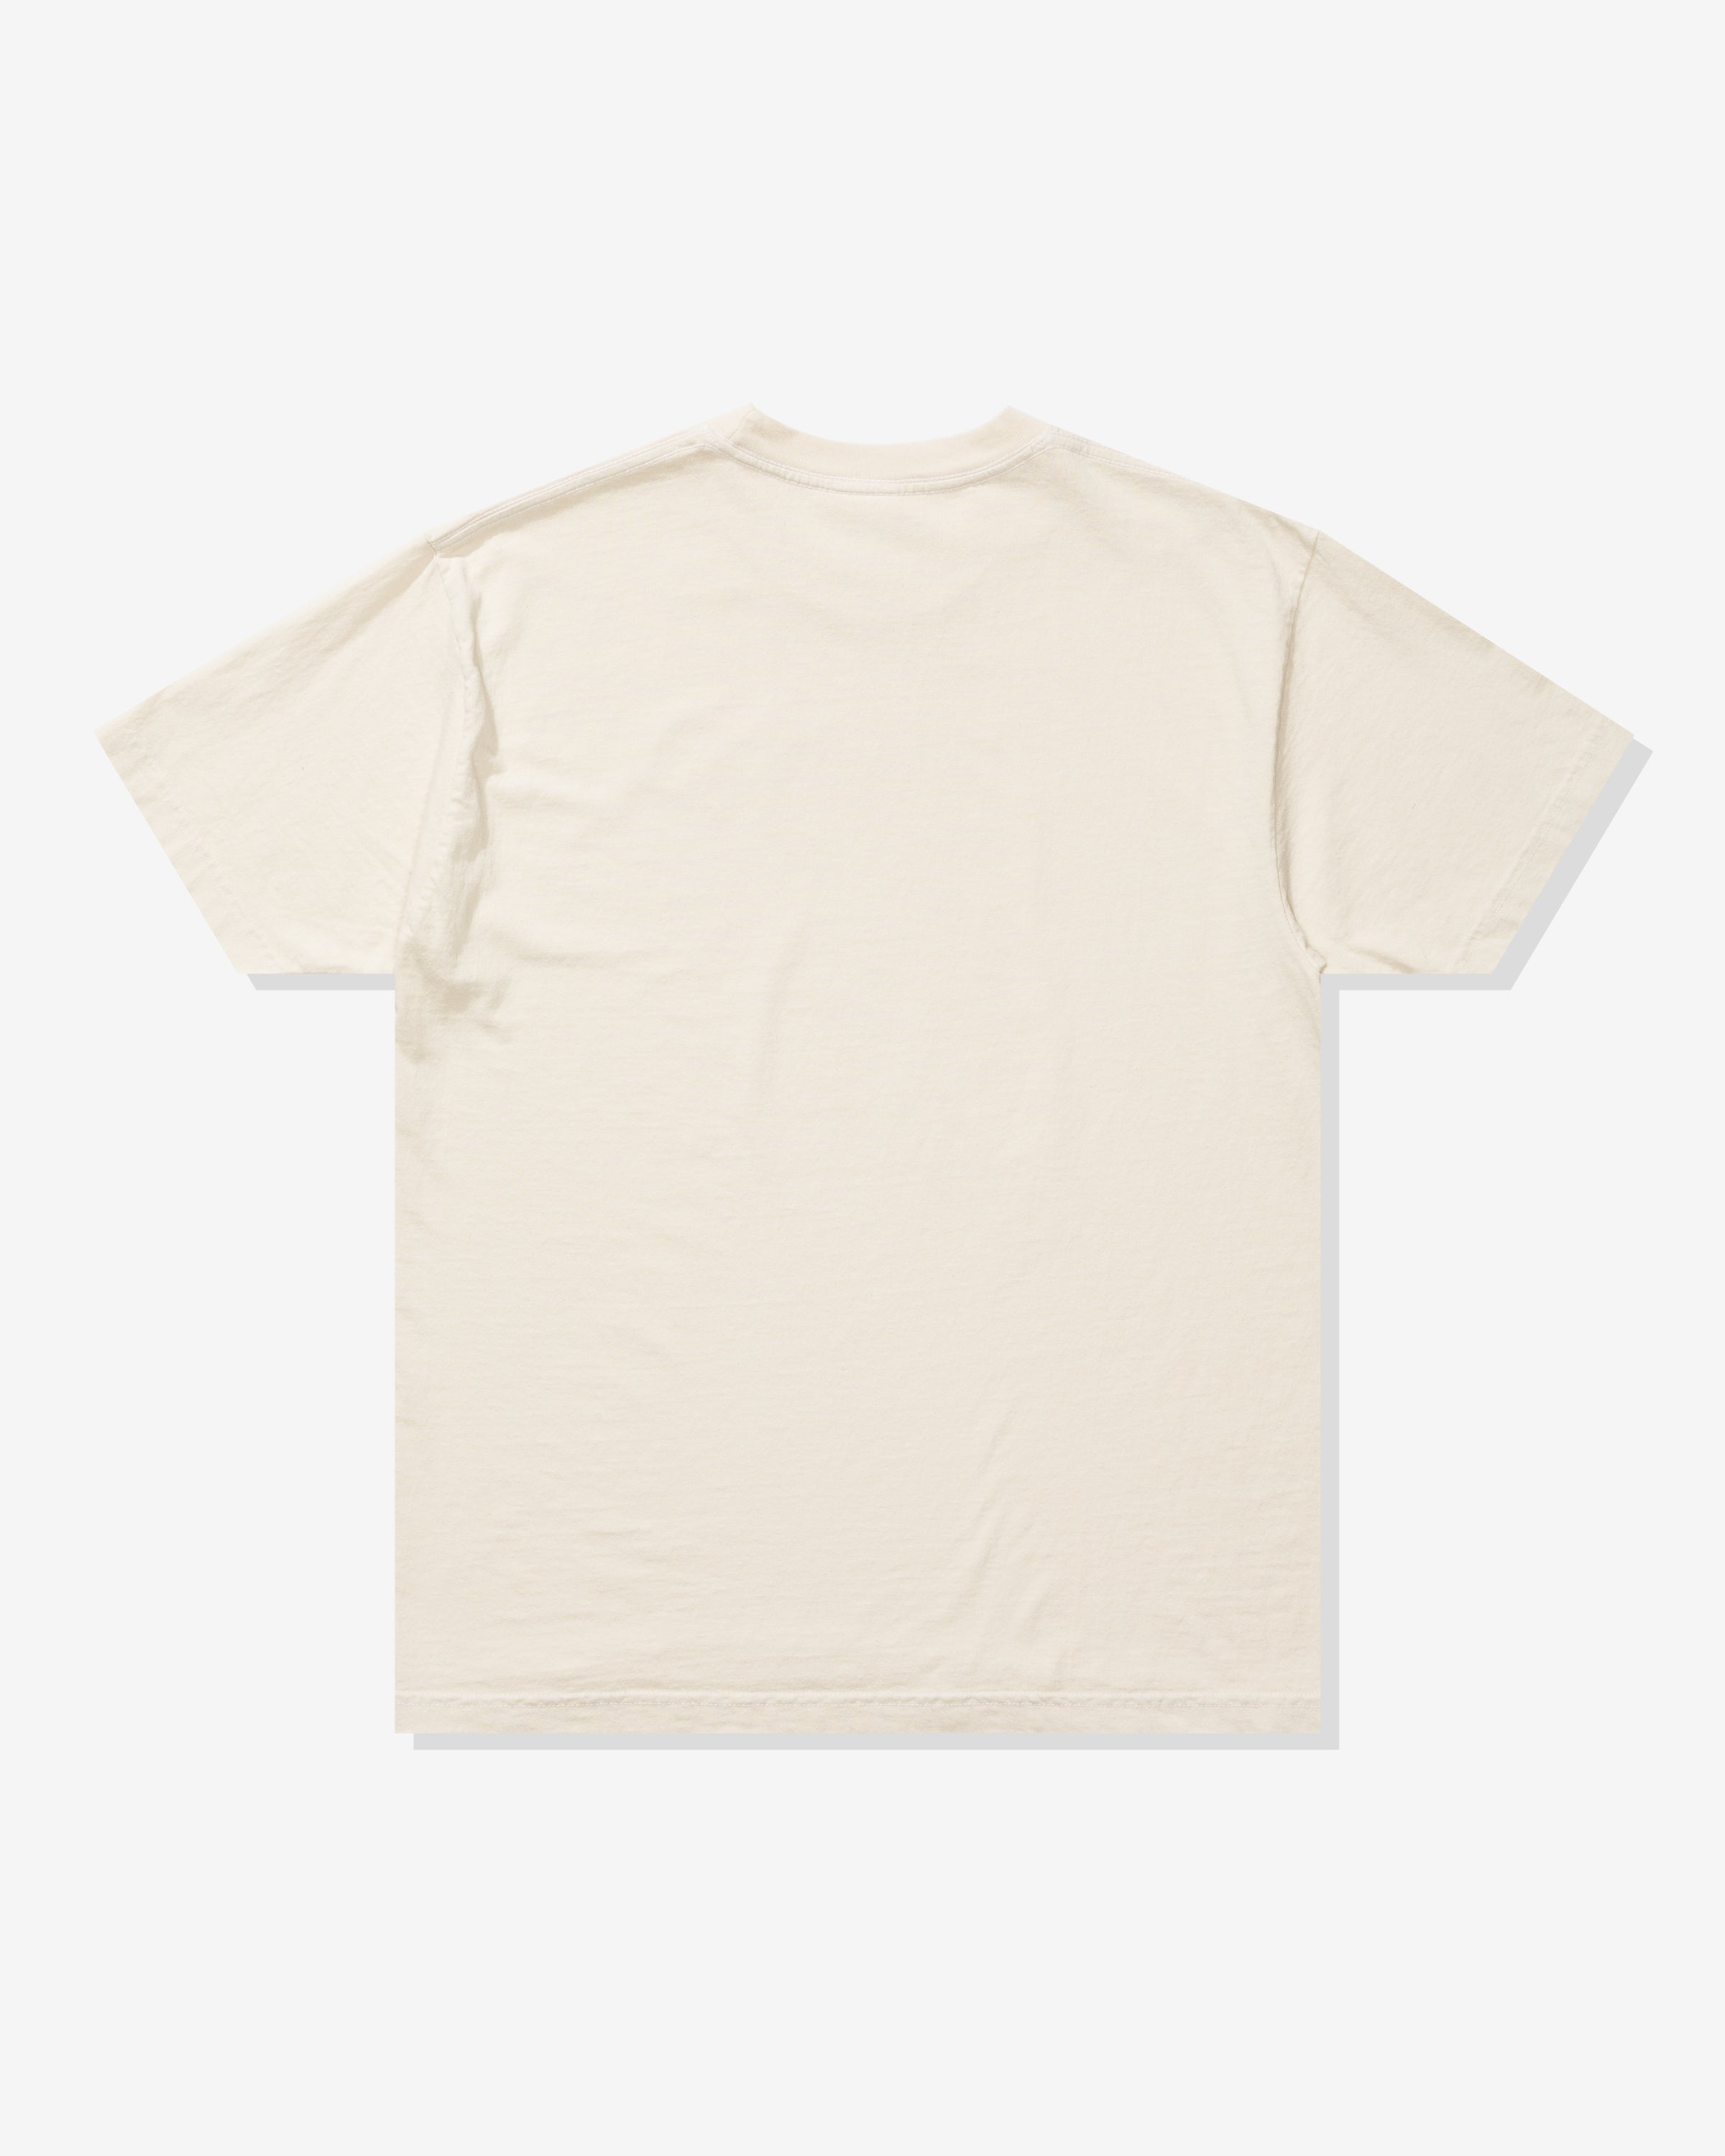 UNDEFEATED PICKUP S/S TEE – Undefeated